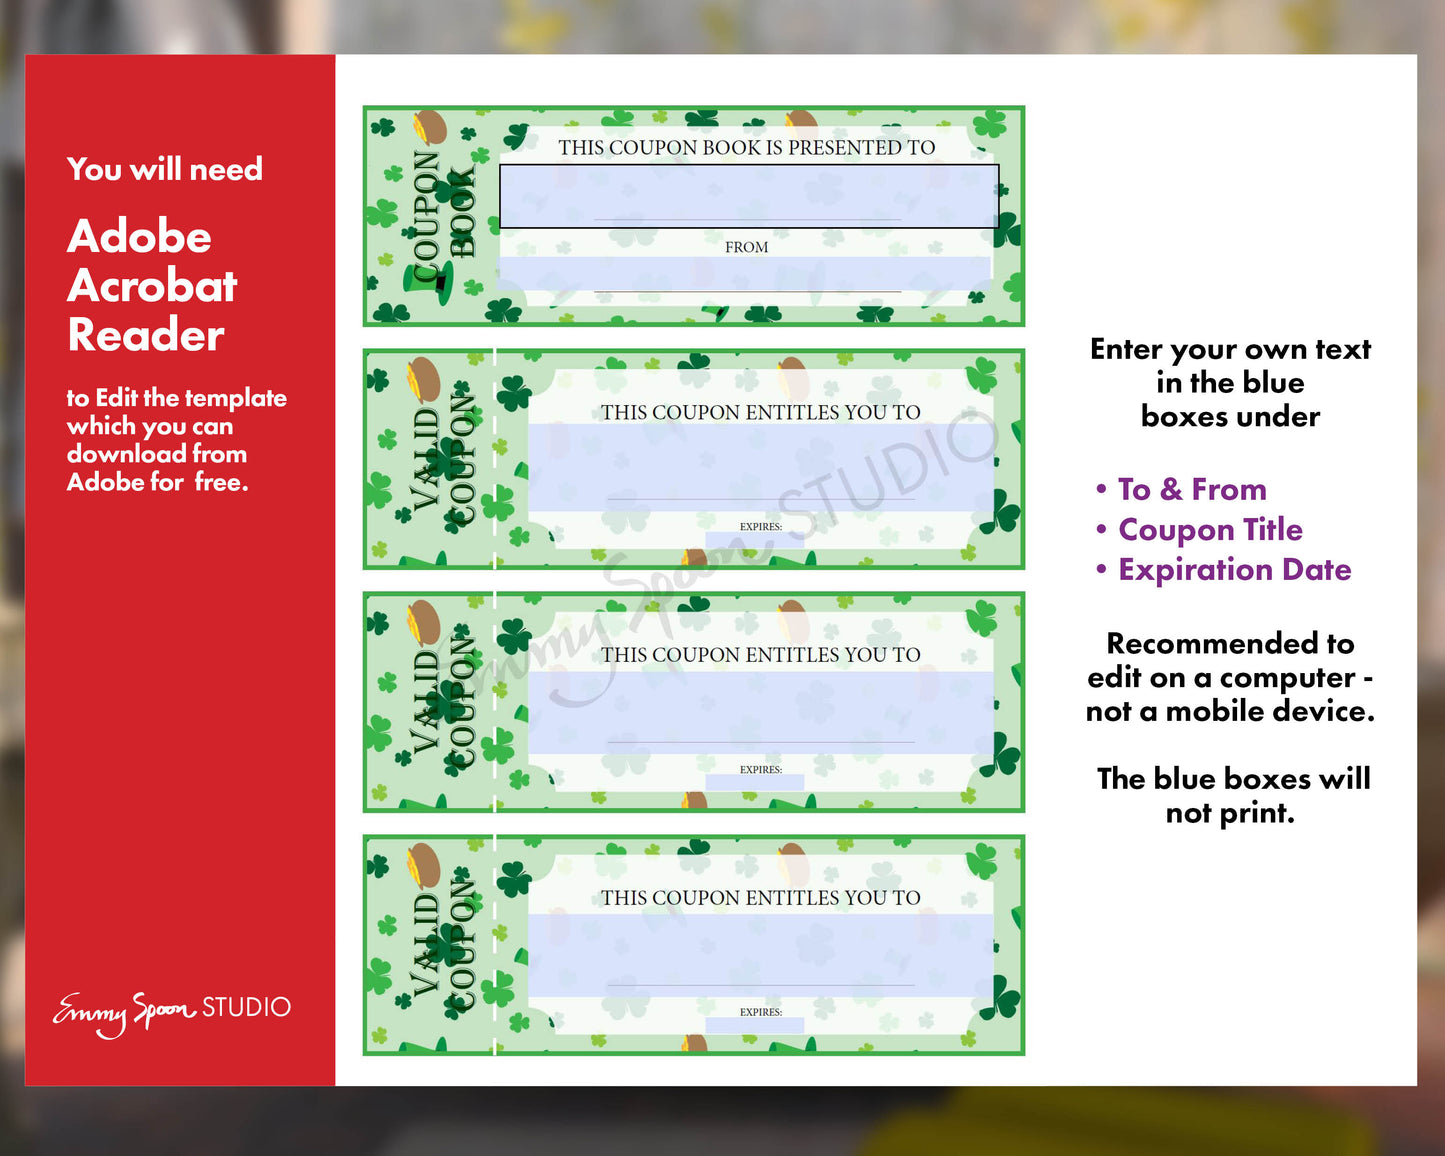 St Patrick’s Day Editable Coupons with Bonus Digital Paper Pack, Personalized Coupons, Printable Paper, Stationary, Letterhead